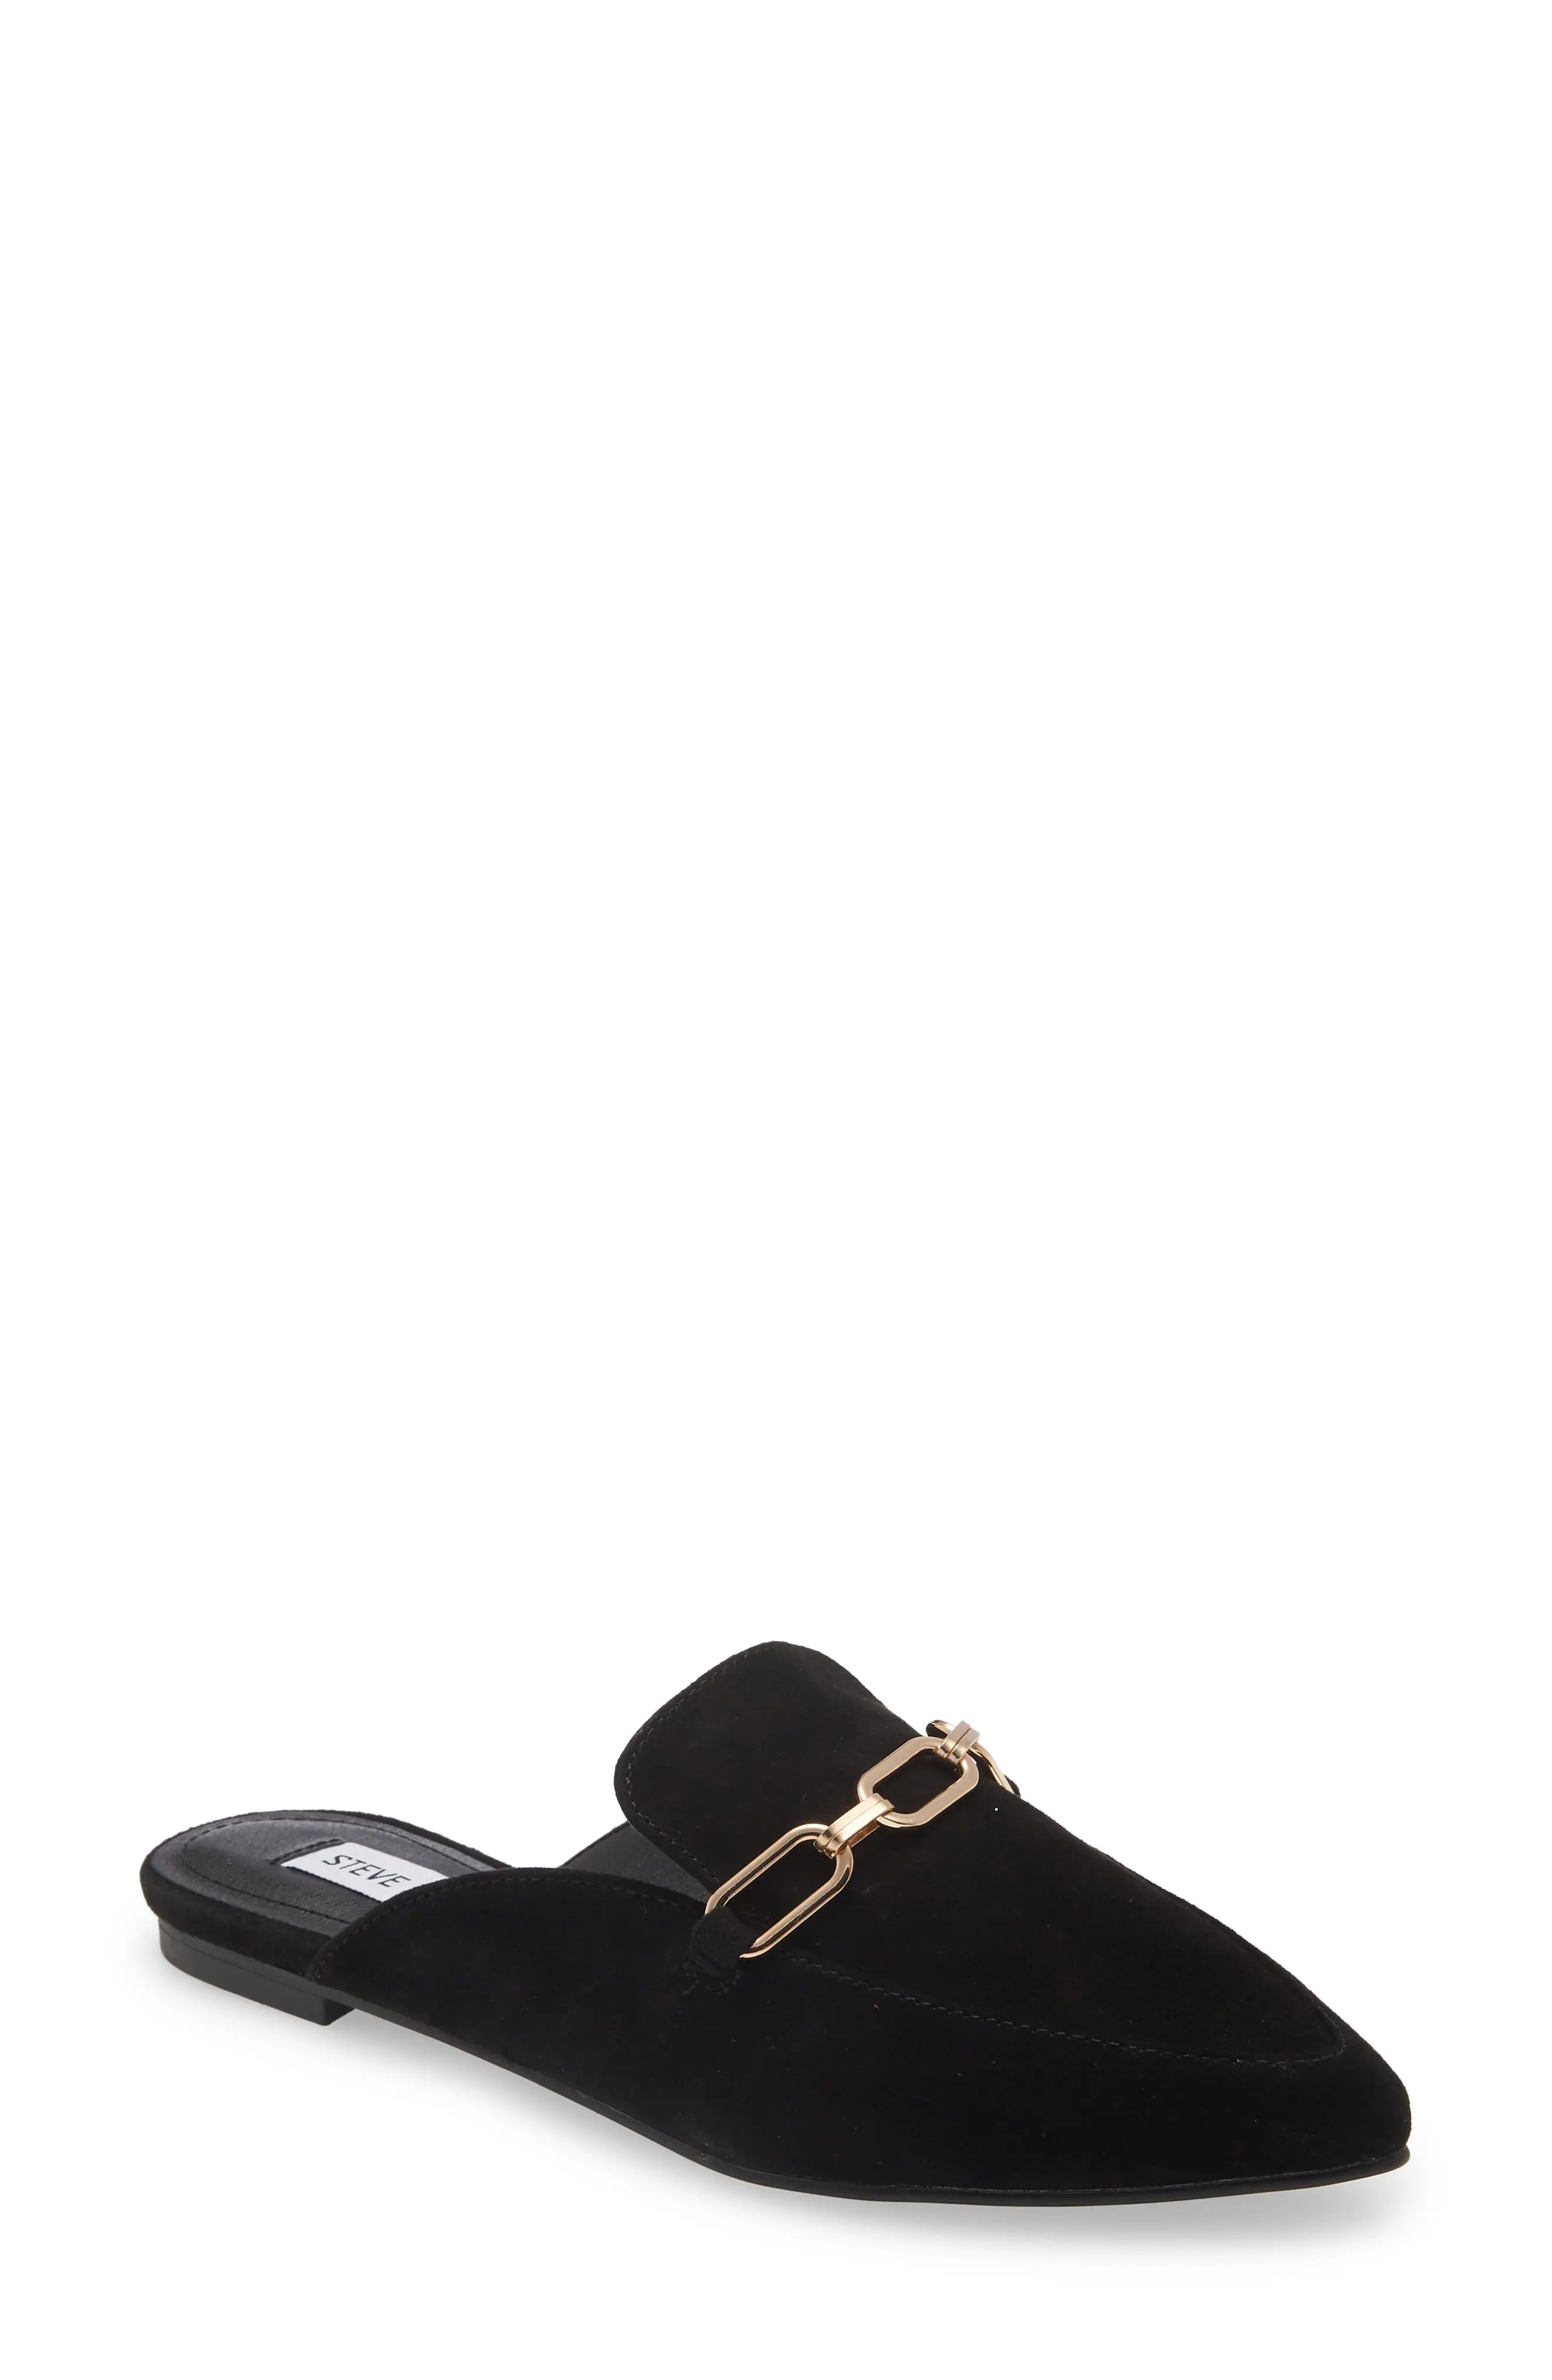 Steve Madden Faraway Chain Mule, Size 6 in Black Sued at Nordstrom | Nordstrom